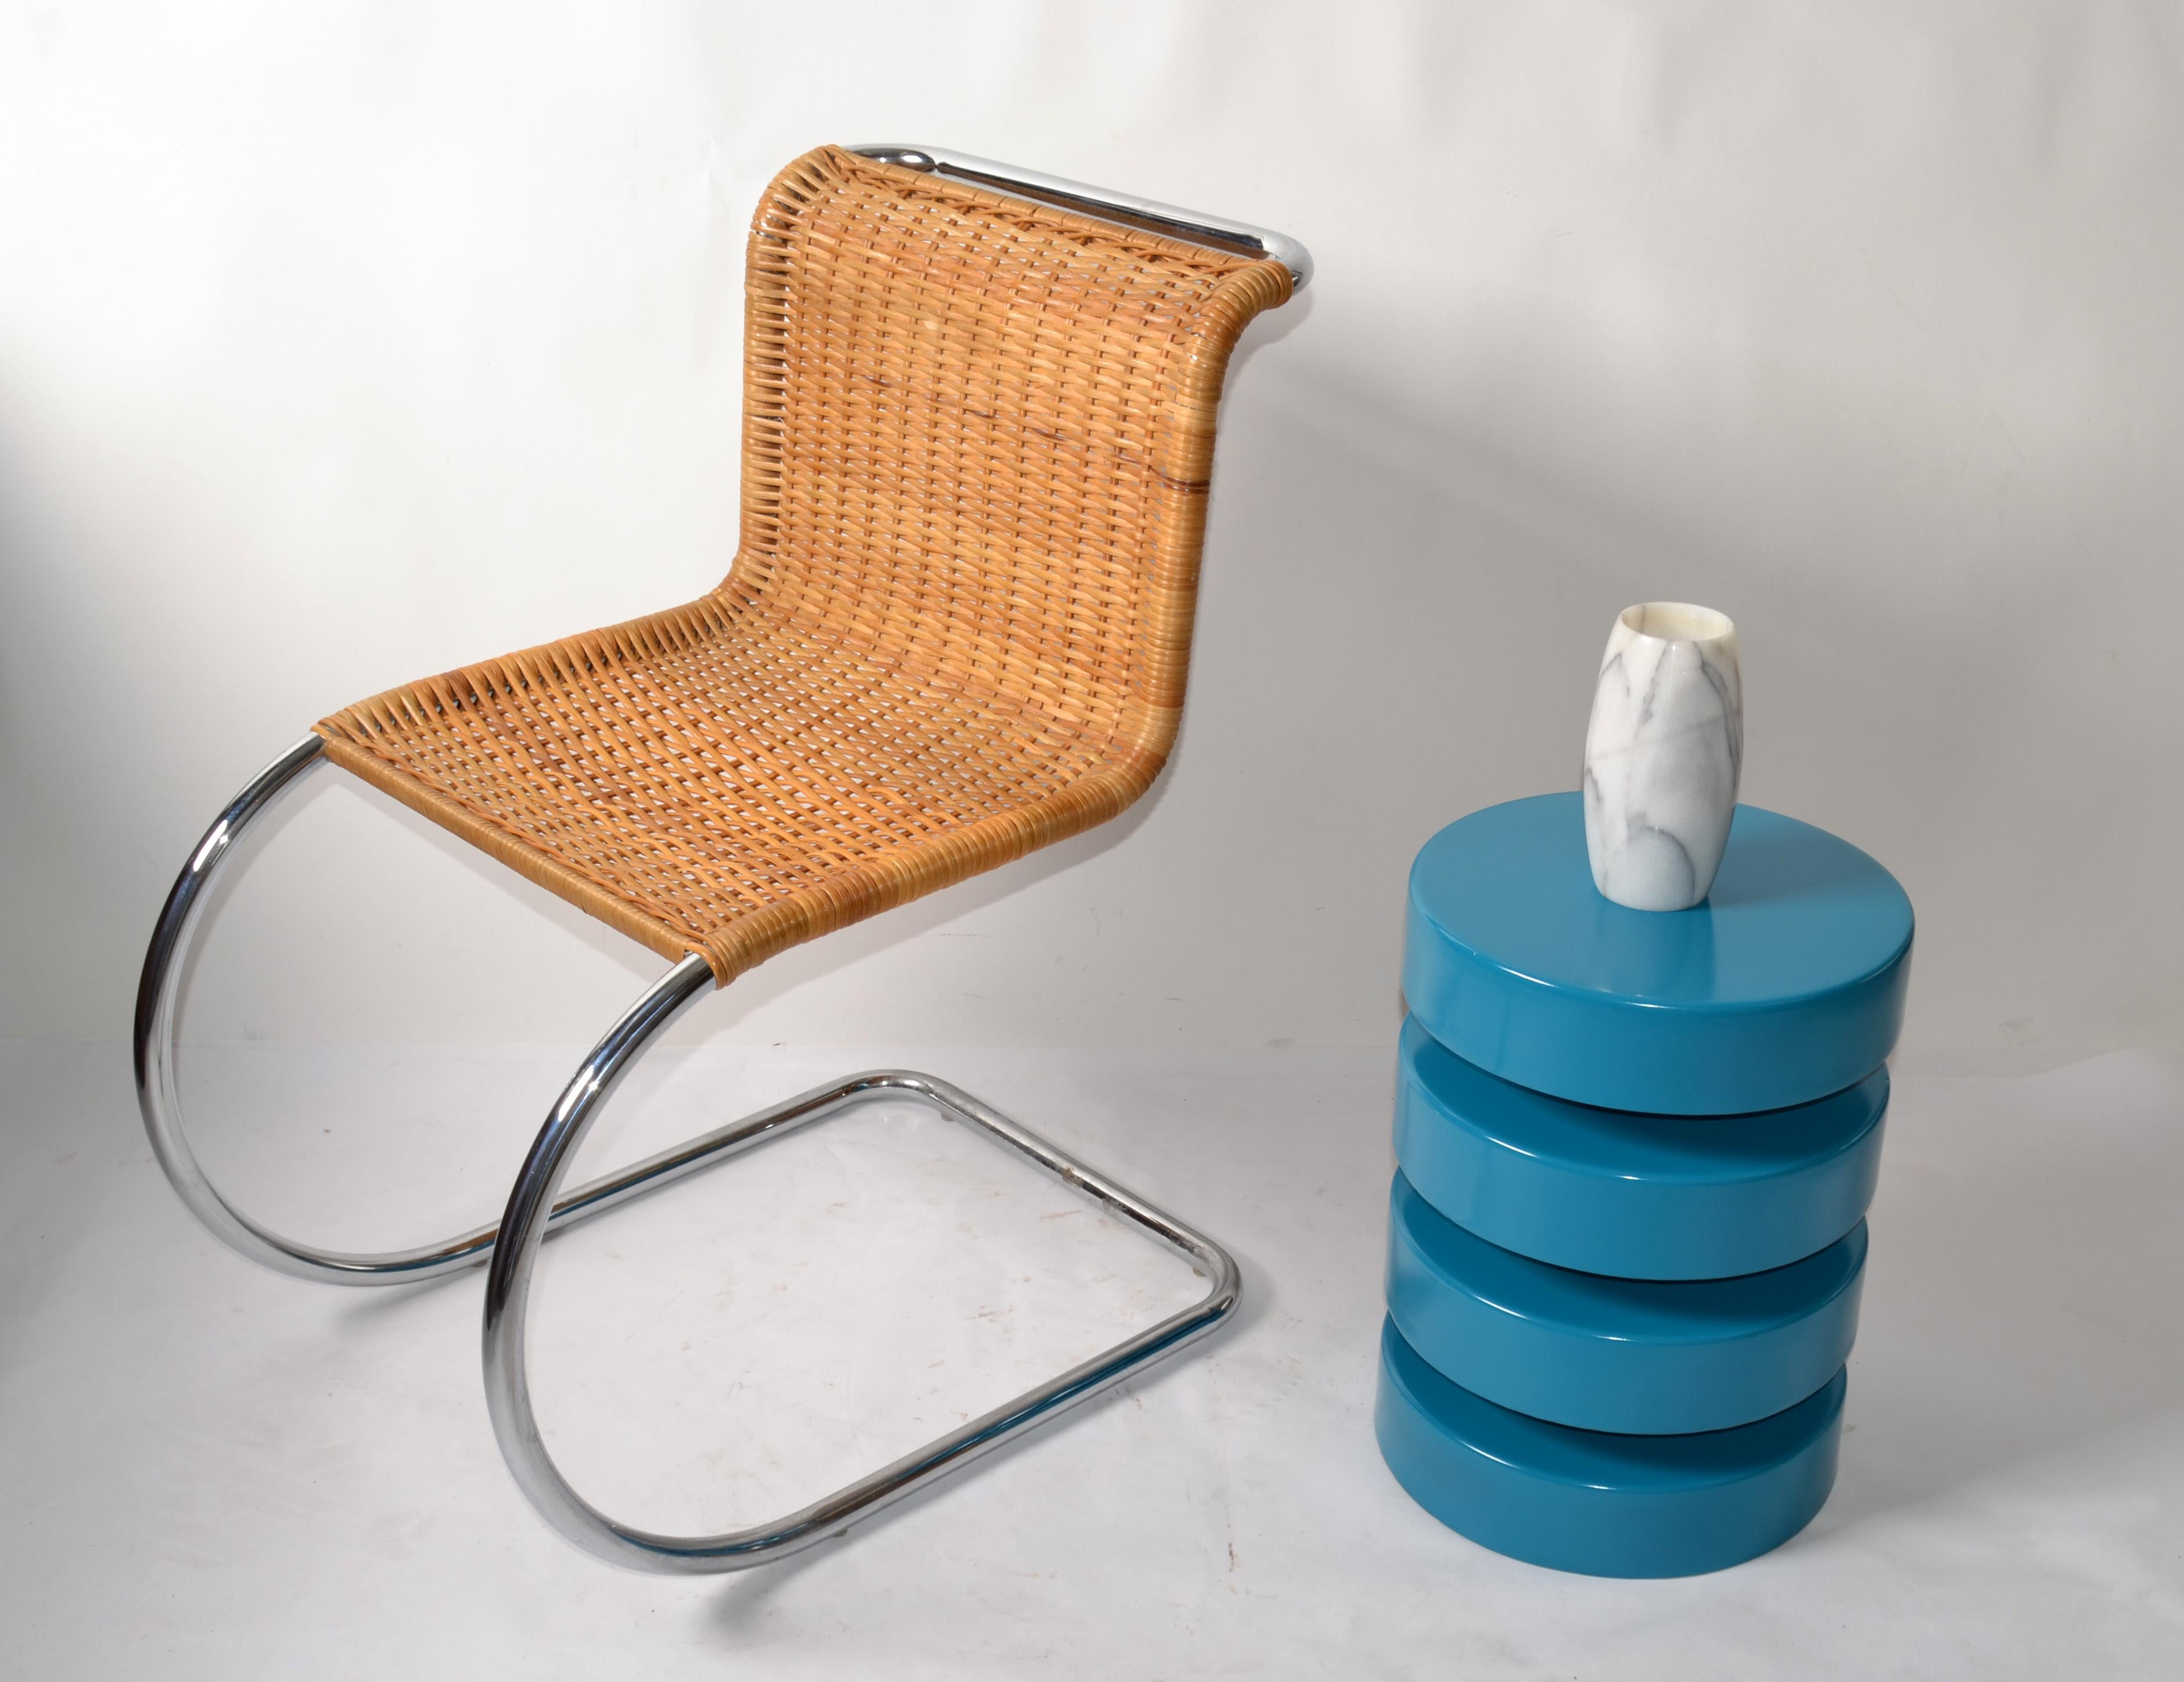 Tubular Ludwig Mies van der Rohe Attributed Mr Chair Armless Woven Cane Seat 70s For Sale 5